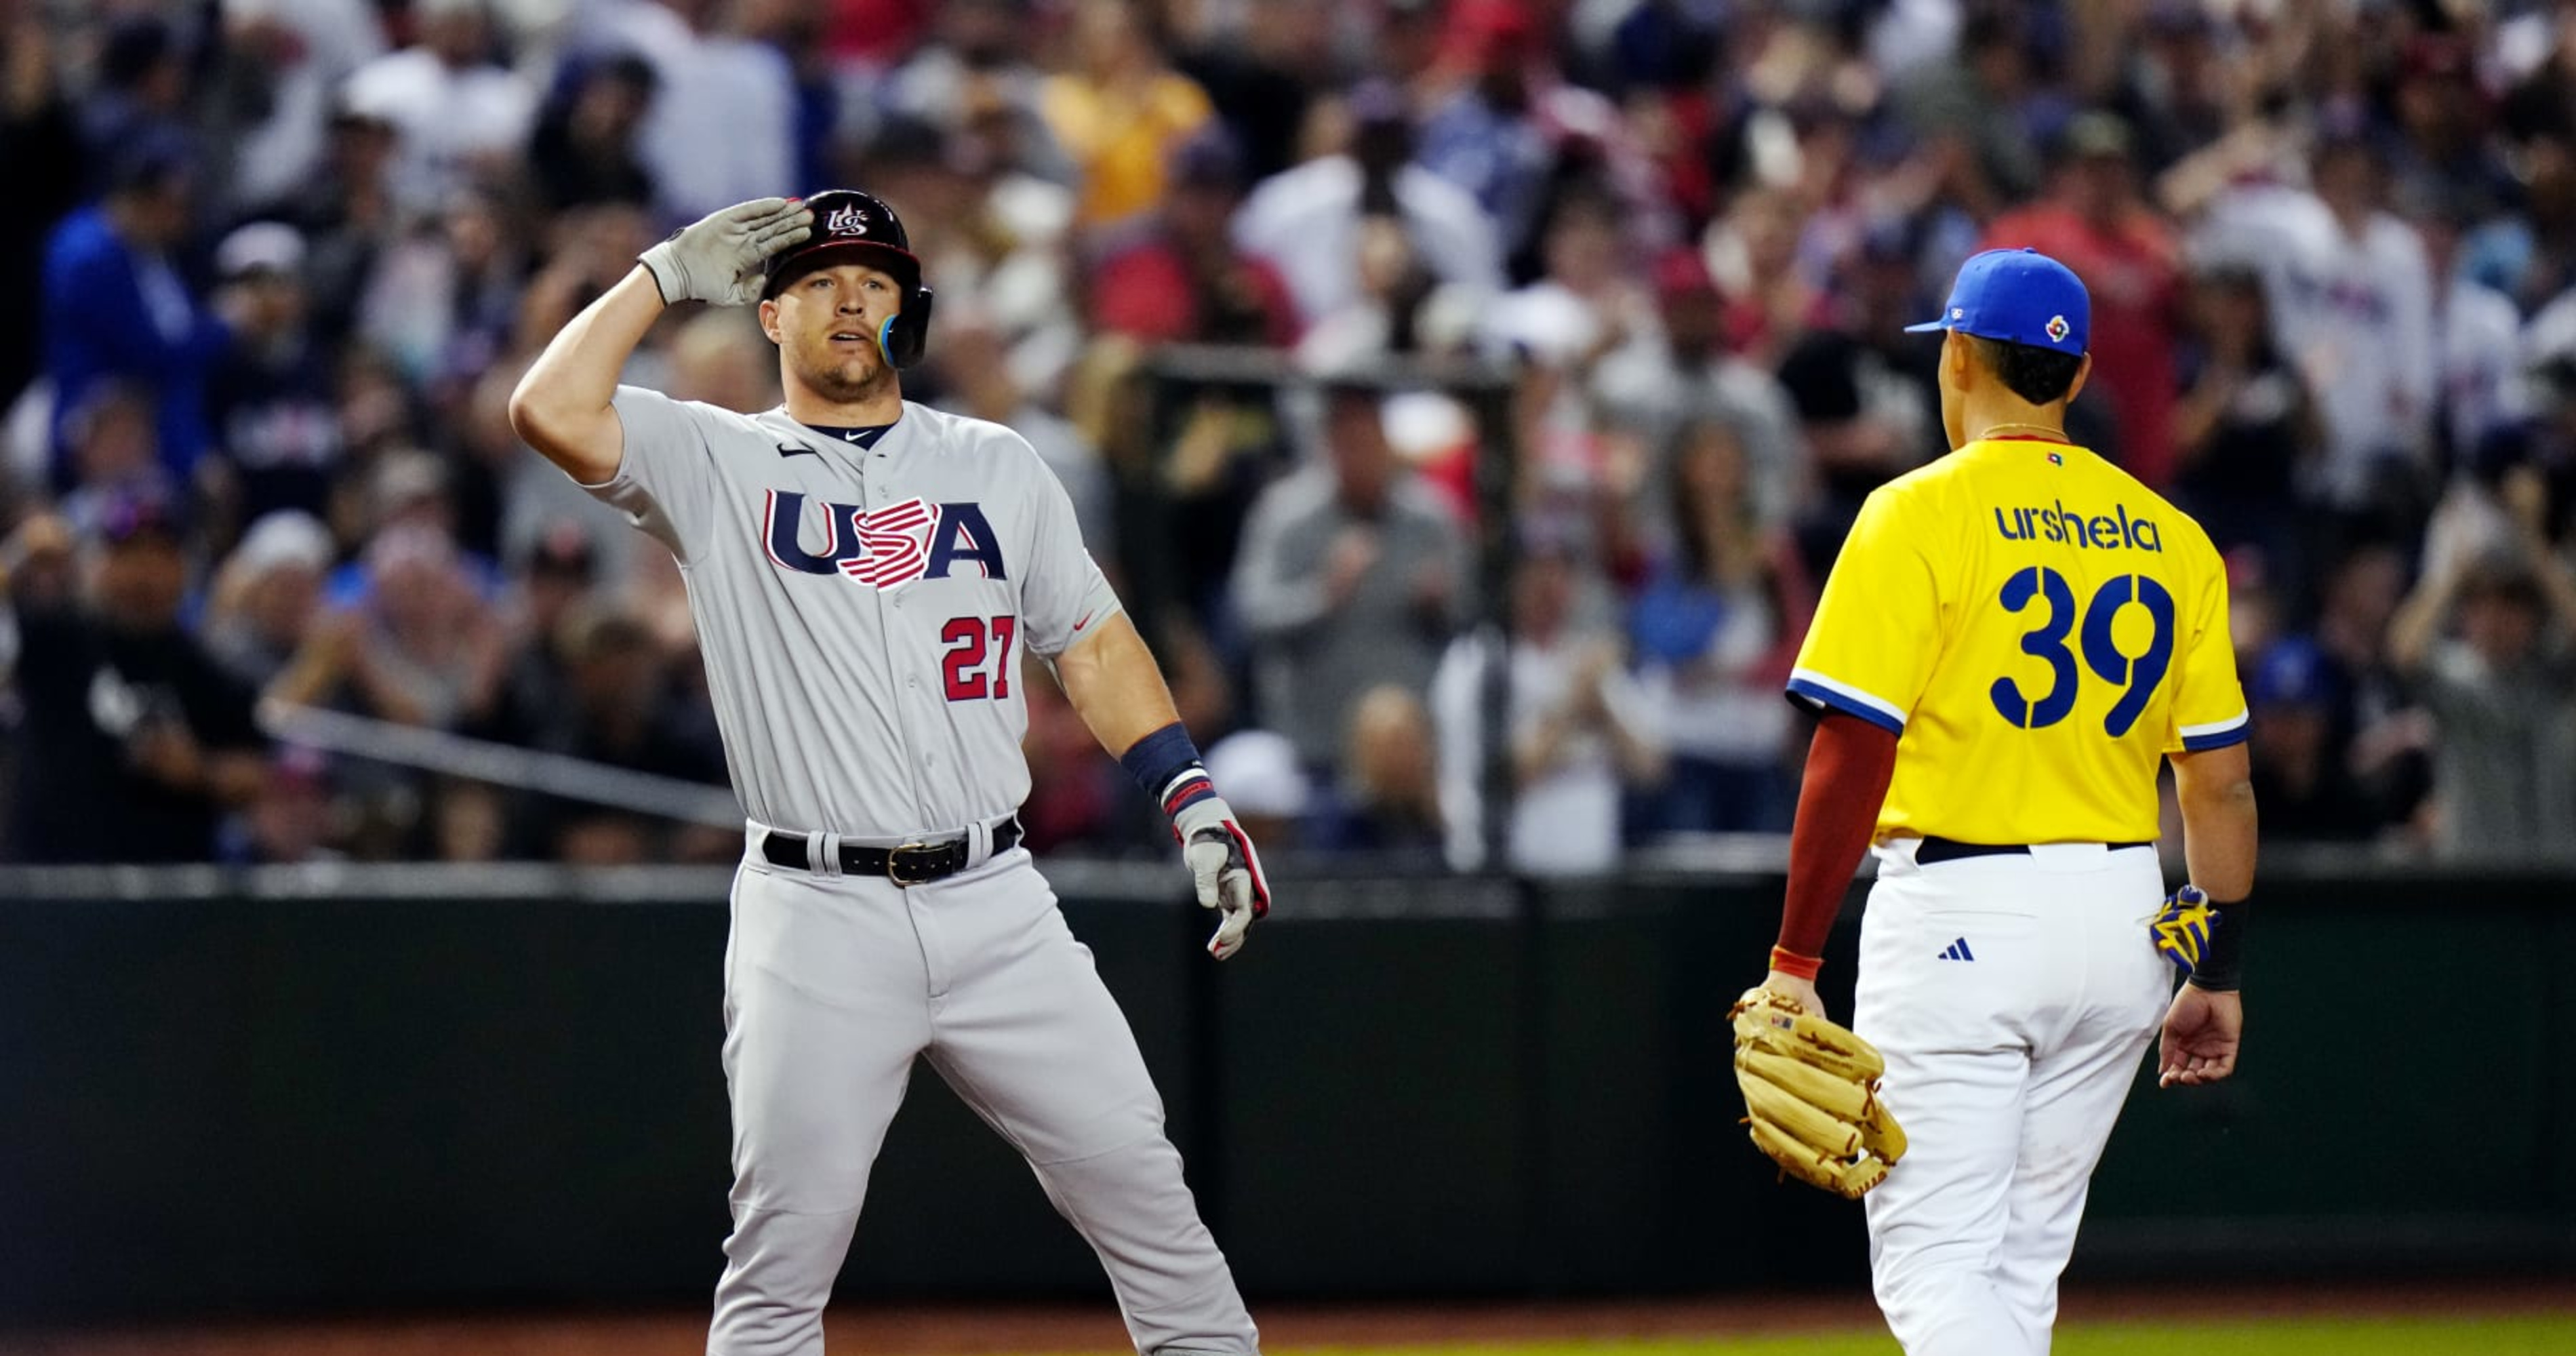 Mike Trout's Clutch Hitting Wows Twitter as USA Advances in WBC